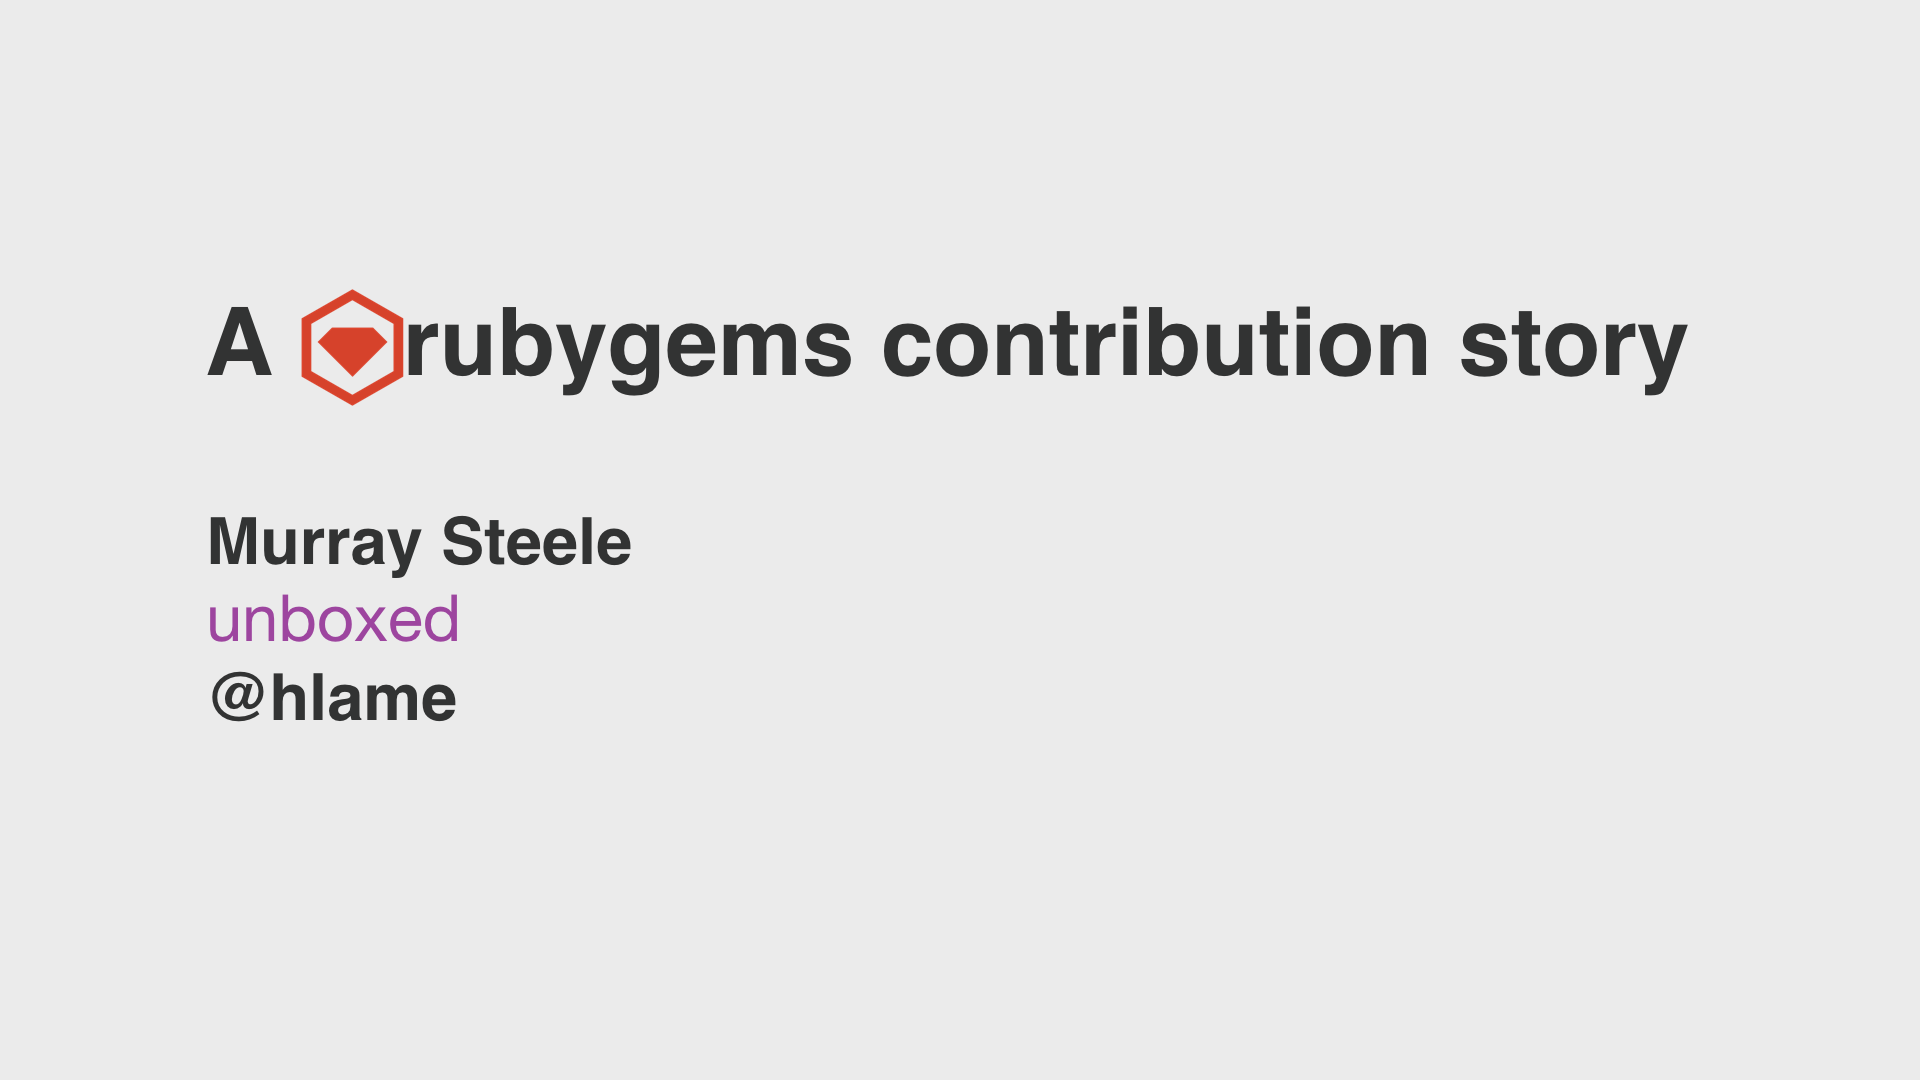 text: A rubygems contribution story, Murray Steele, unboxed, @hlame